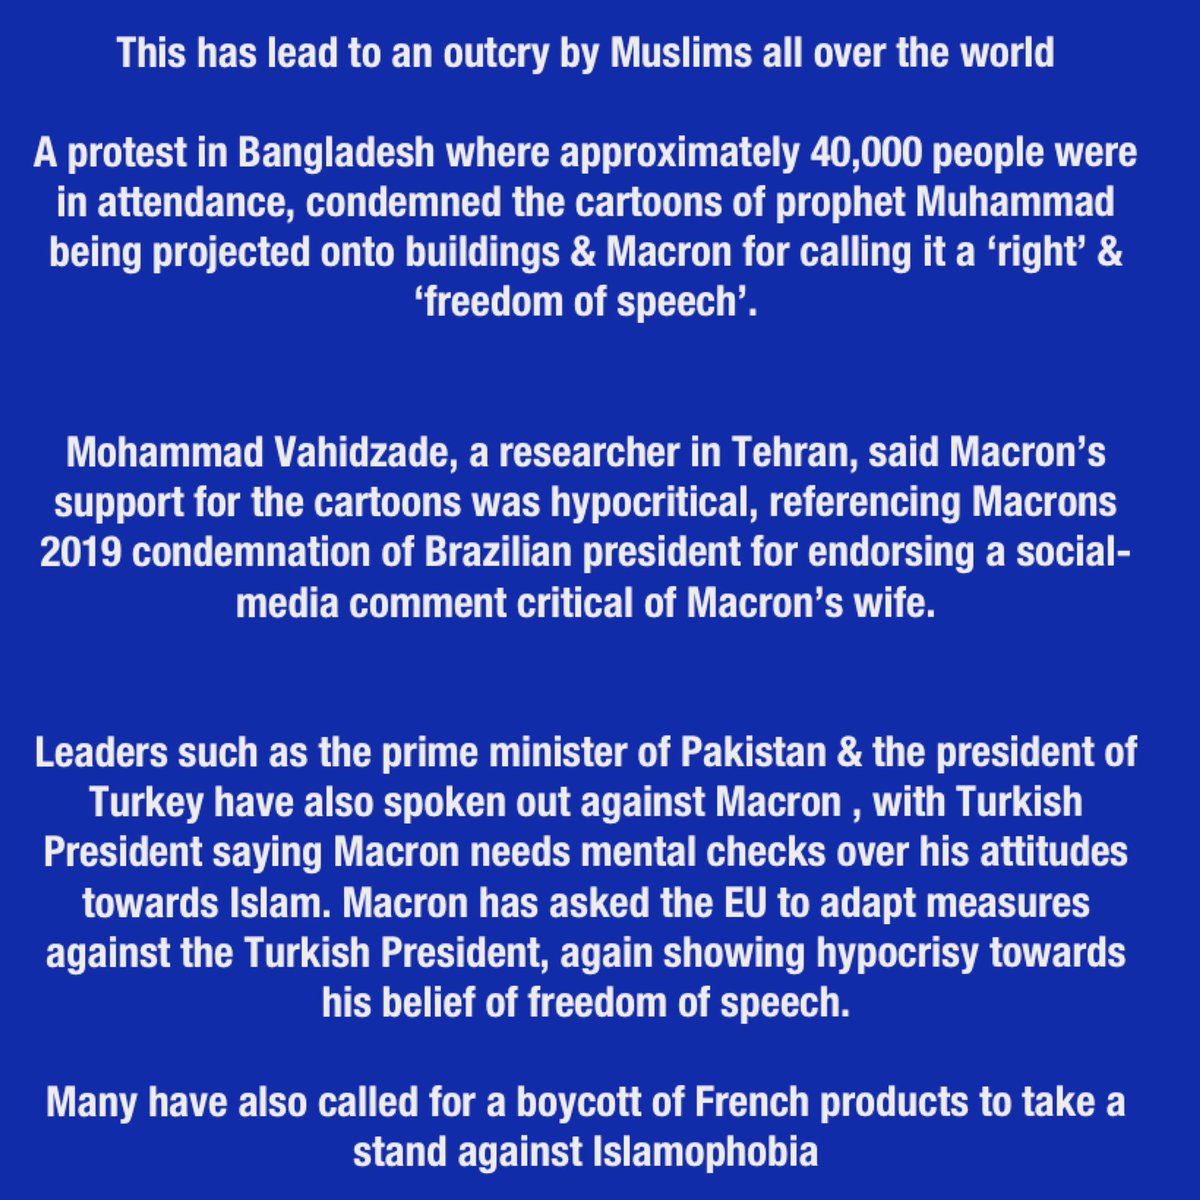 Why there’s tension between France & Muslims right now (pt 2):